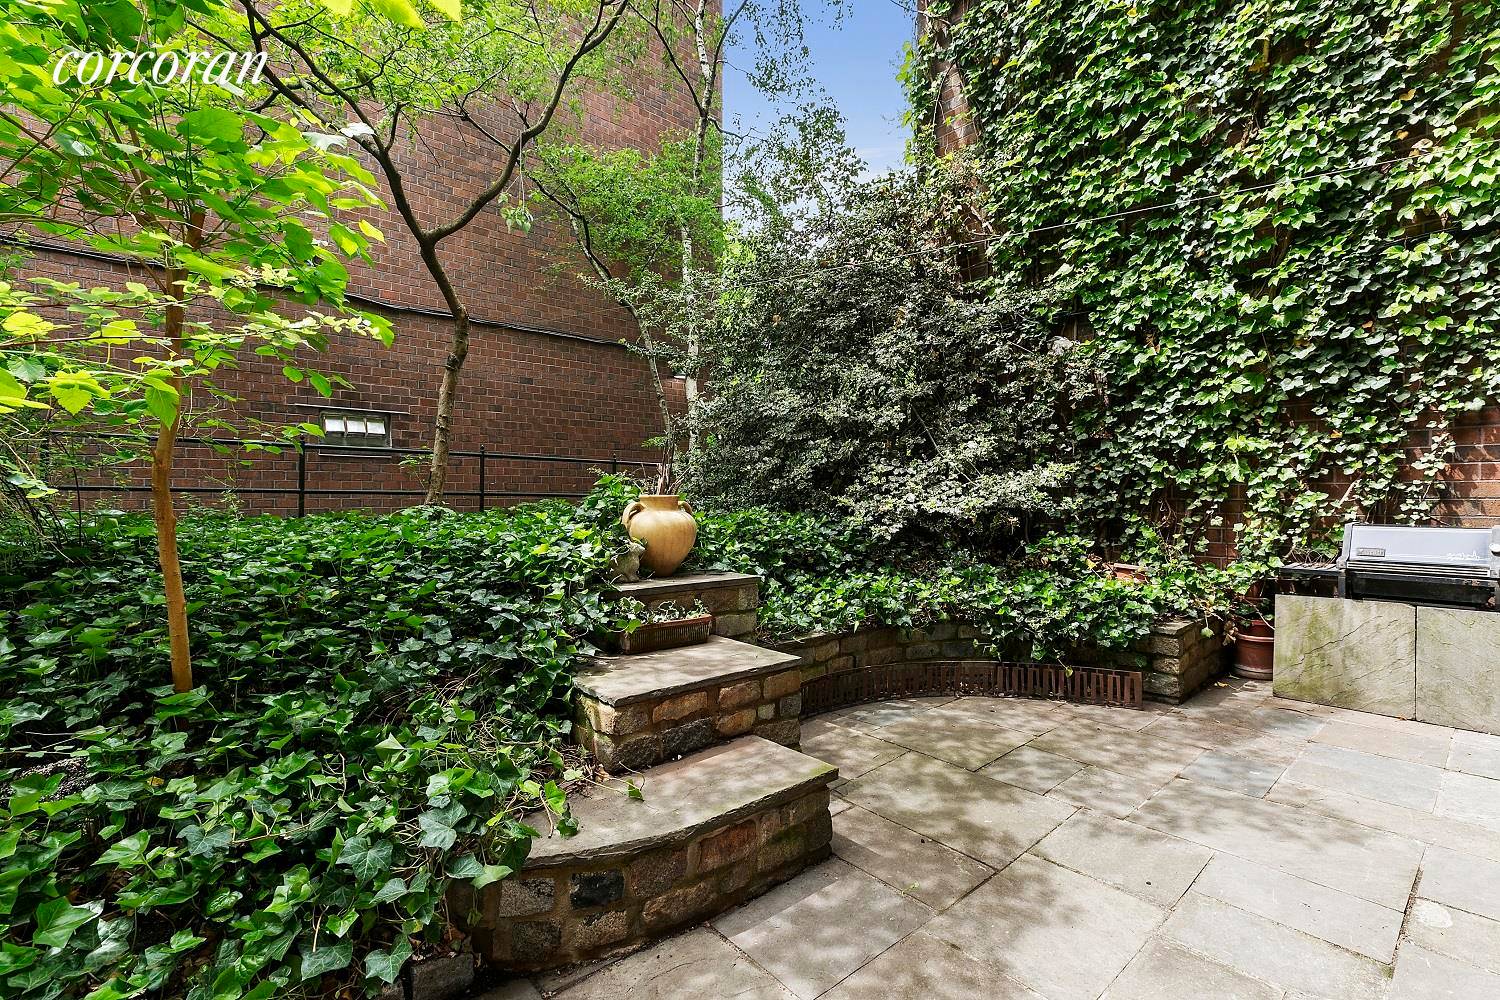 Create your dream 3 bedroom, 2 bath home with large private garden on quiet Washington Street in the West Village, just a block from Hudson River park.